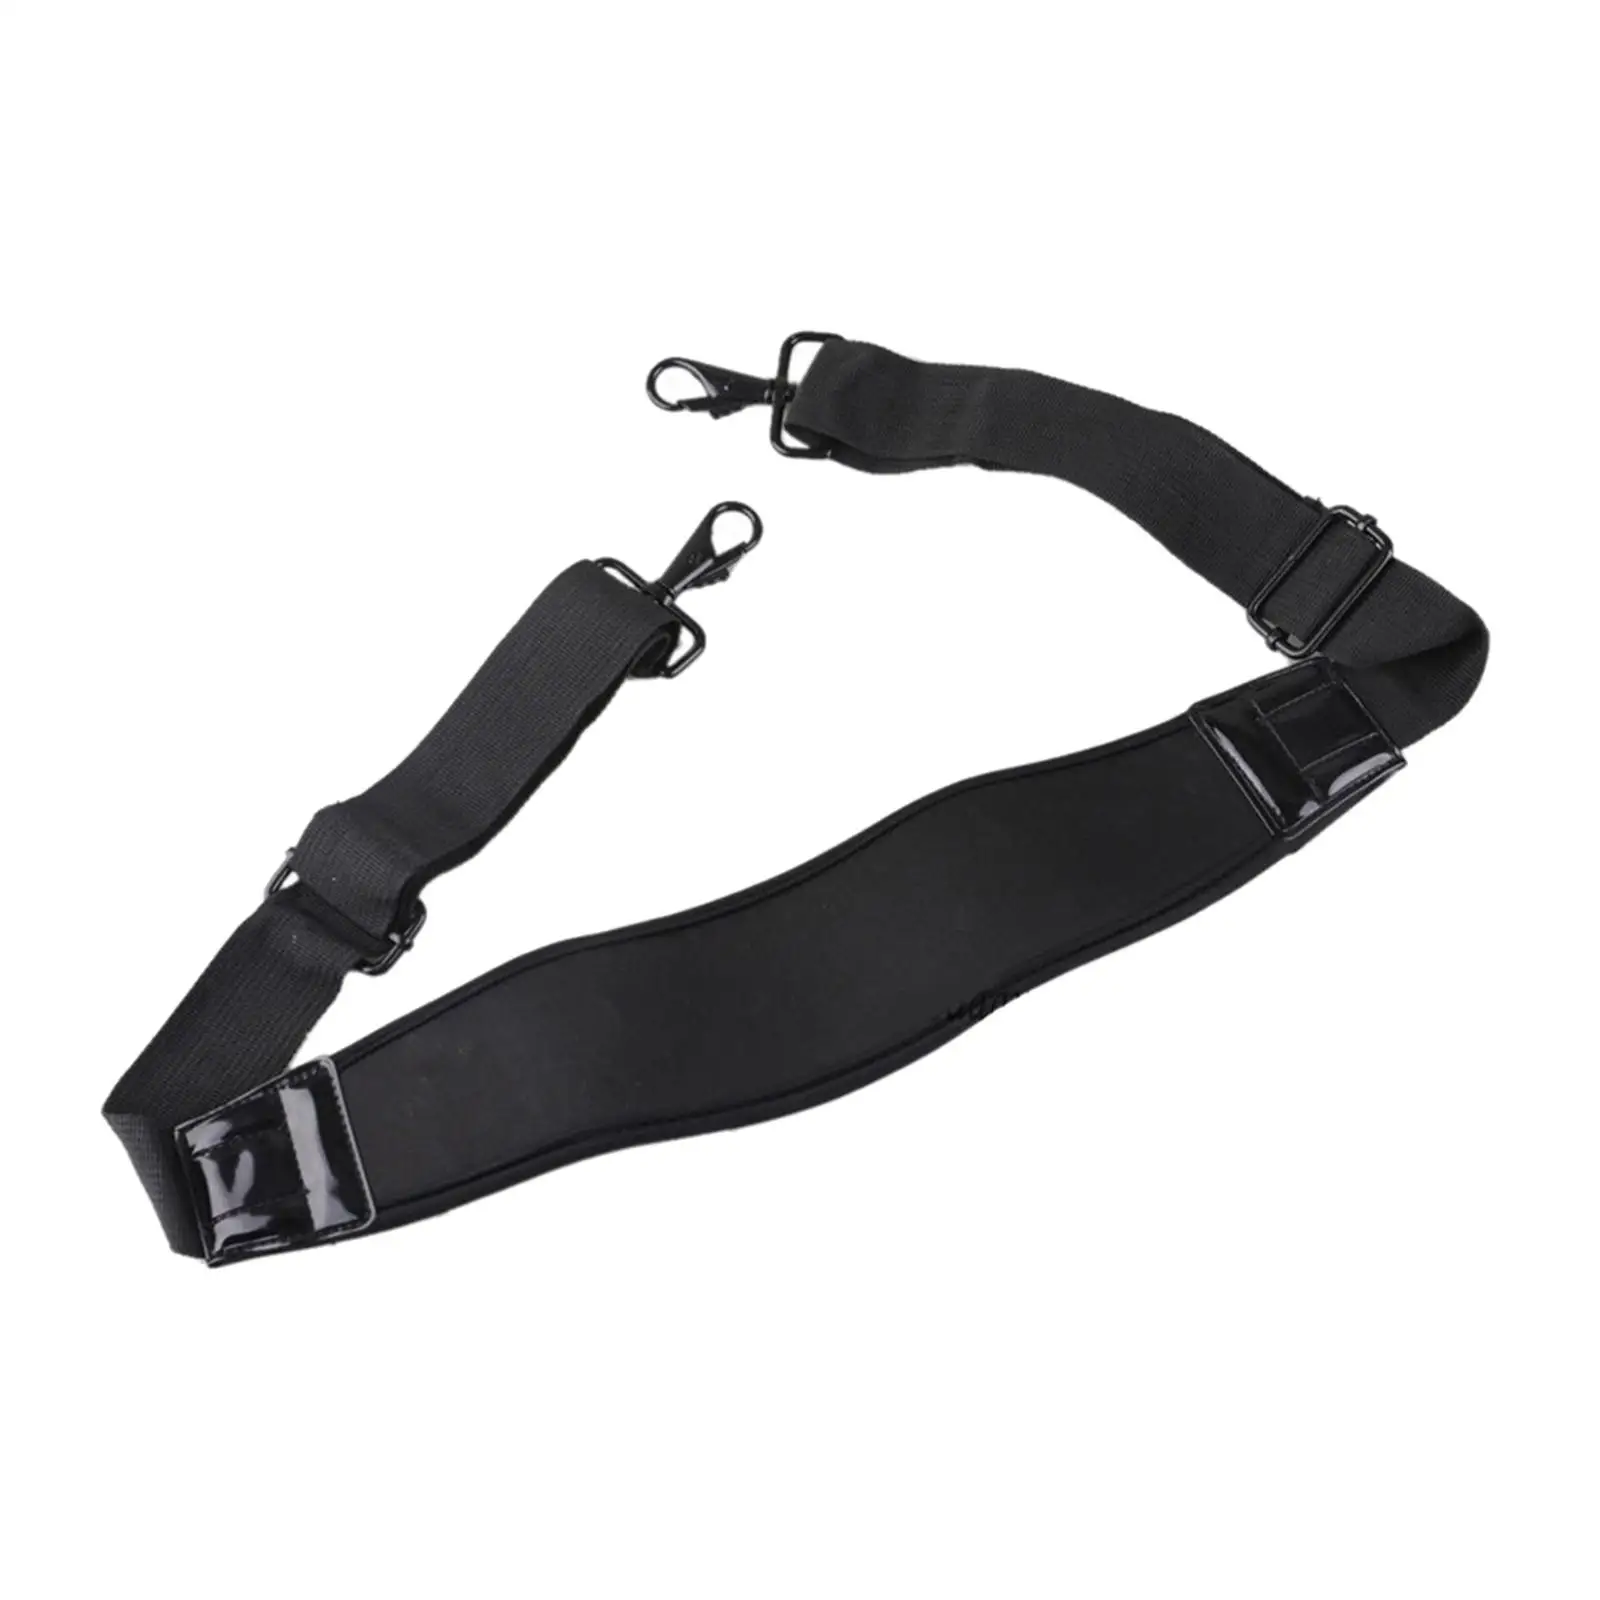 Universal Shoulder Strap 52inch with Metal Hooks Soft Black Anti Slip Durable Thick Padded for Camera Briefcase Bag Laptop